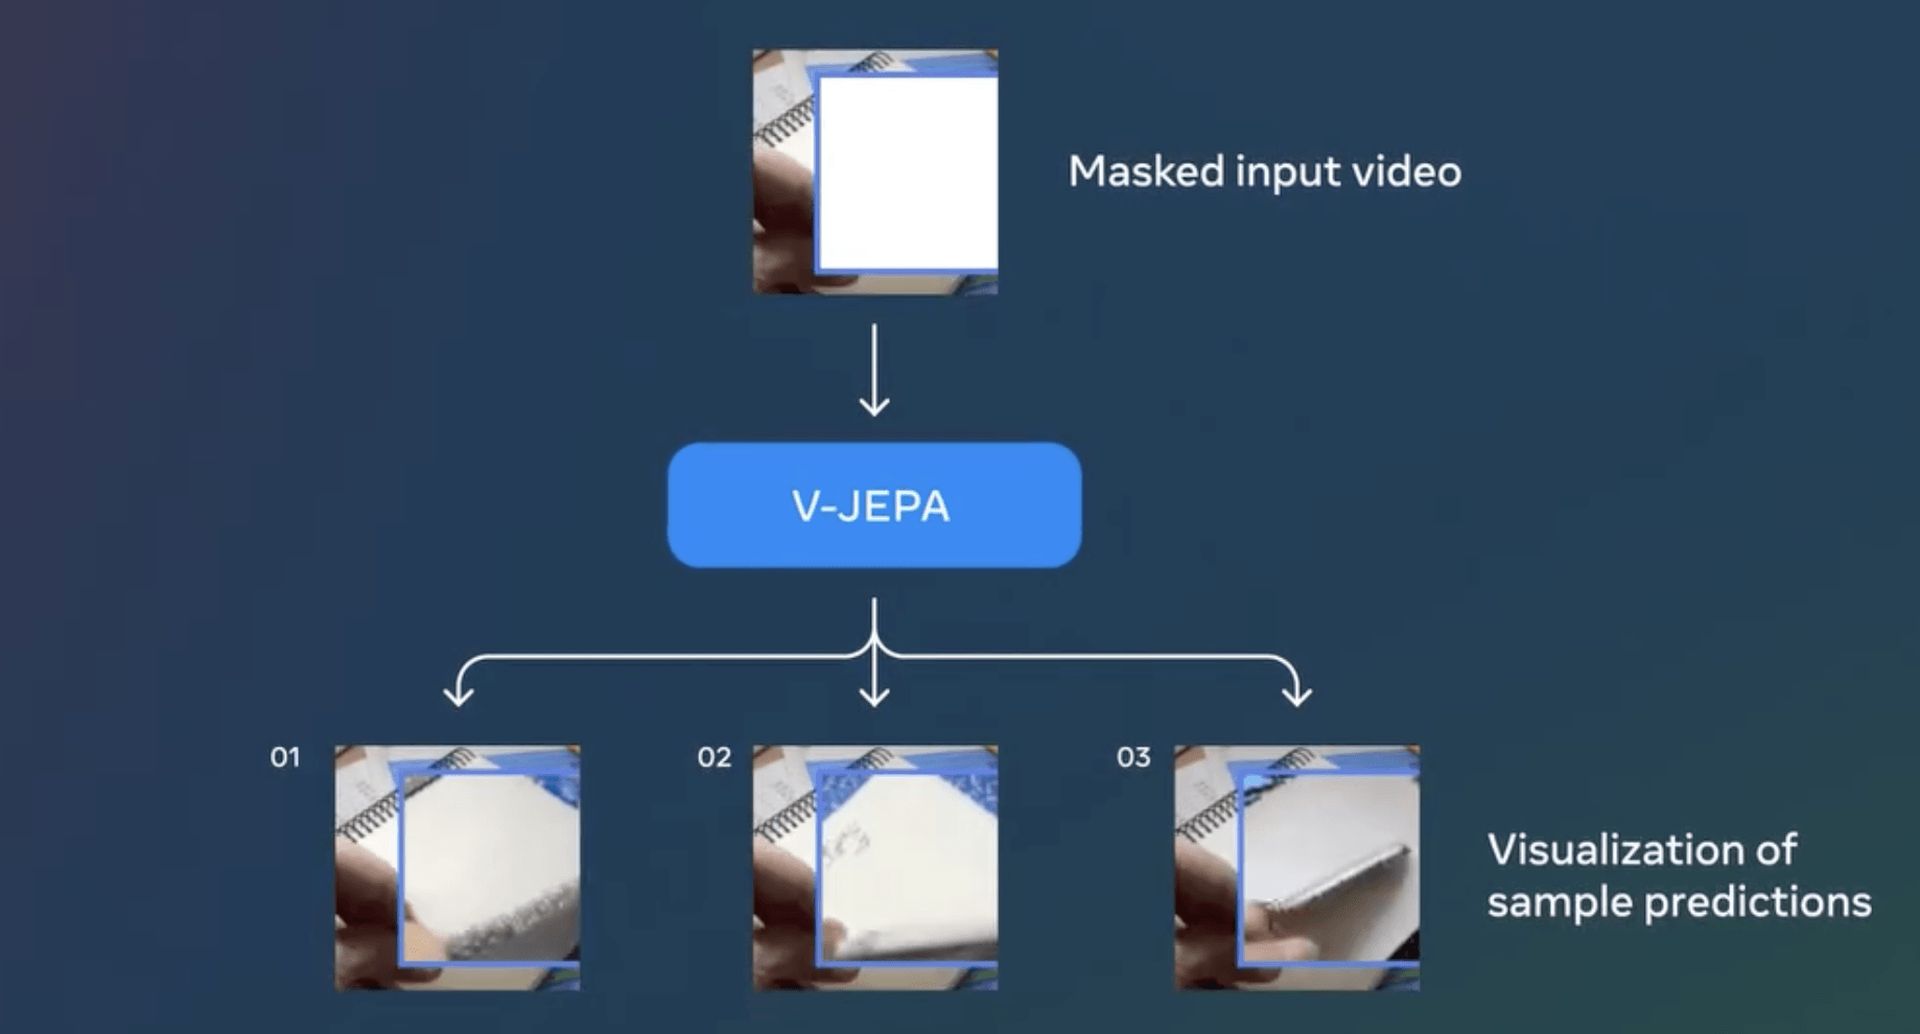 Meta introduces video-based artificial intelligence model: V-JEPA